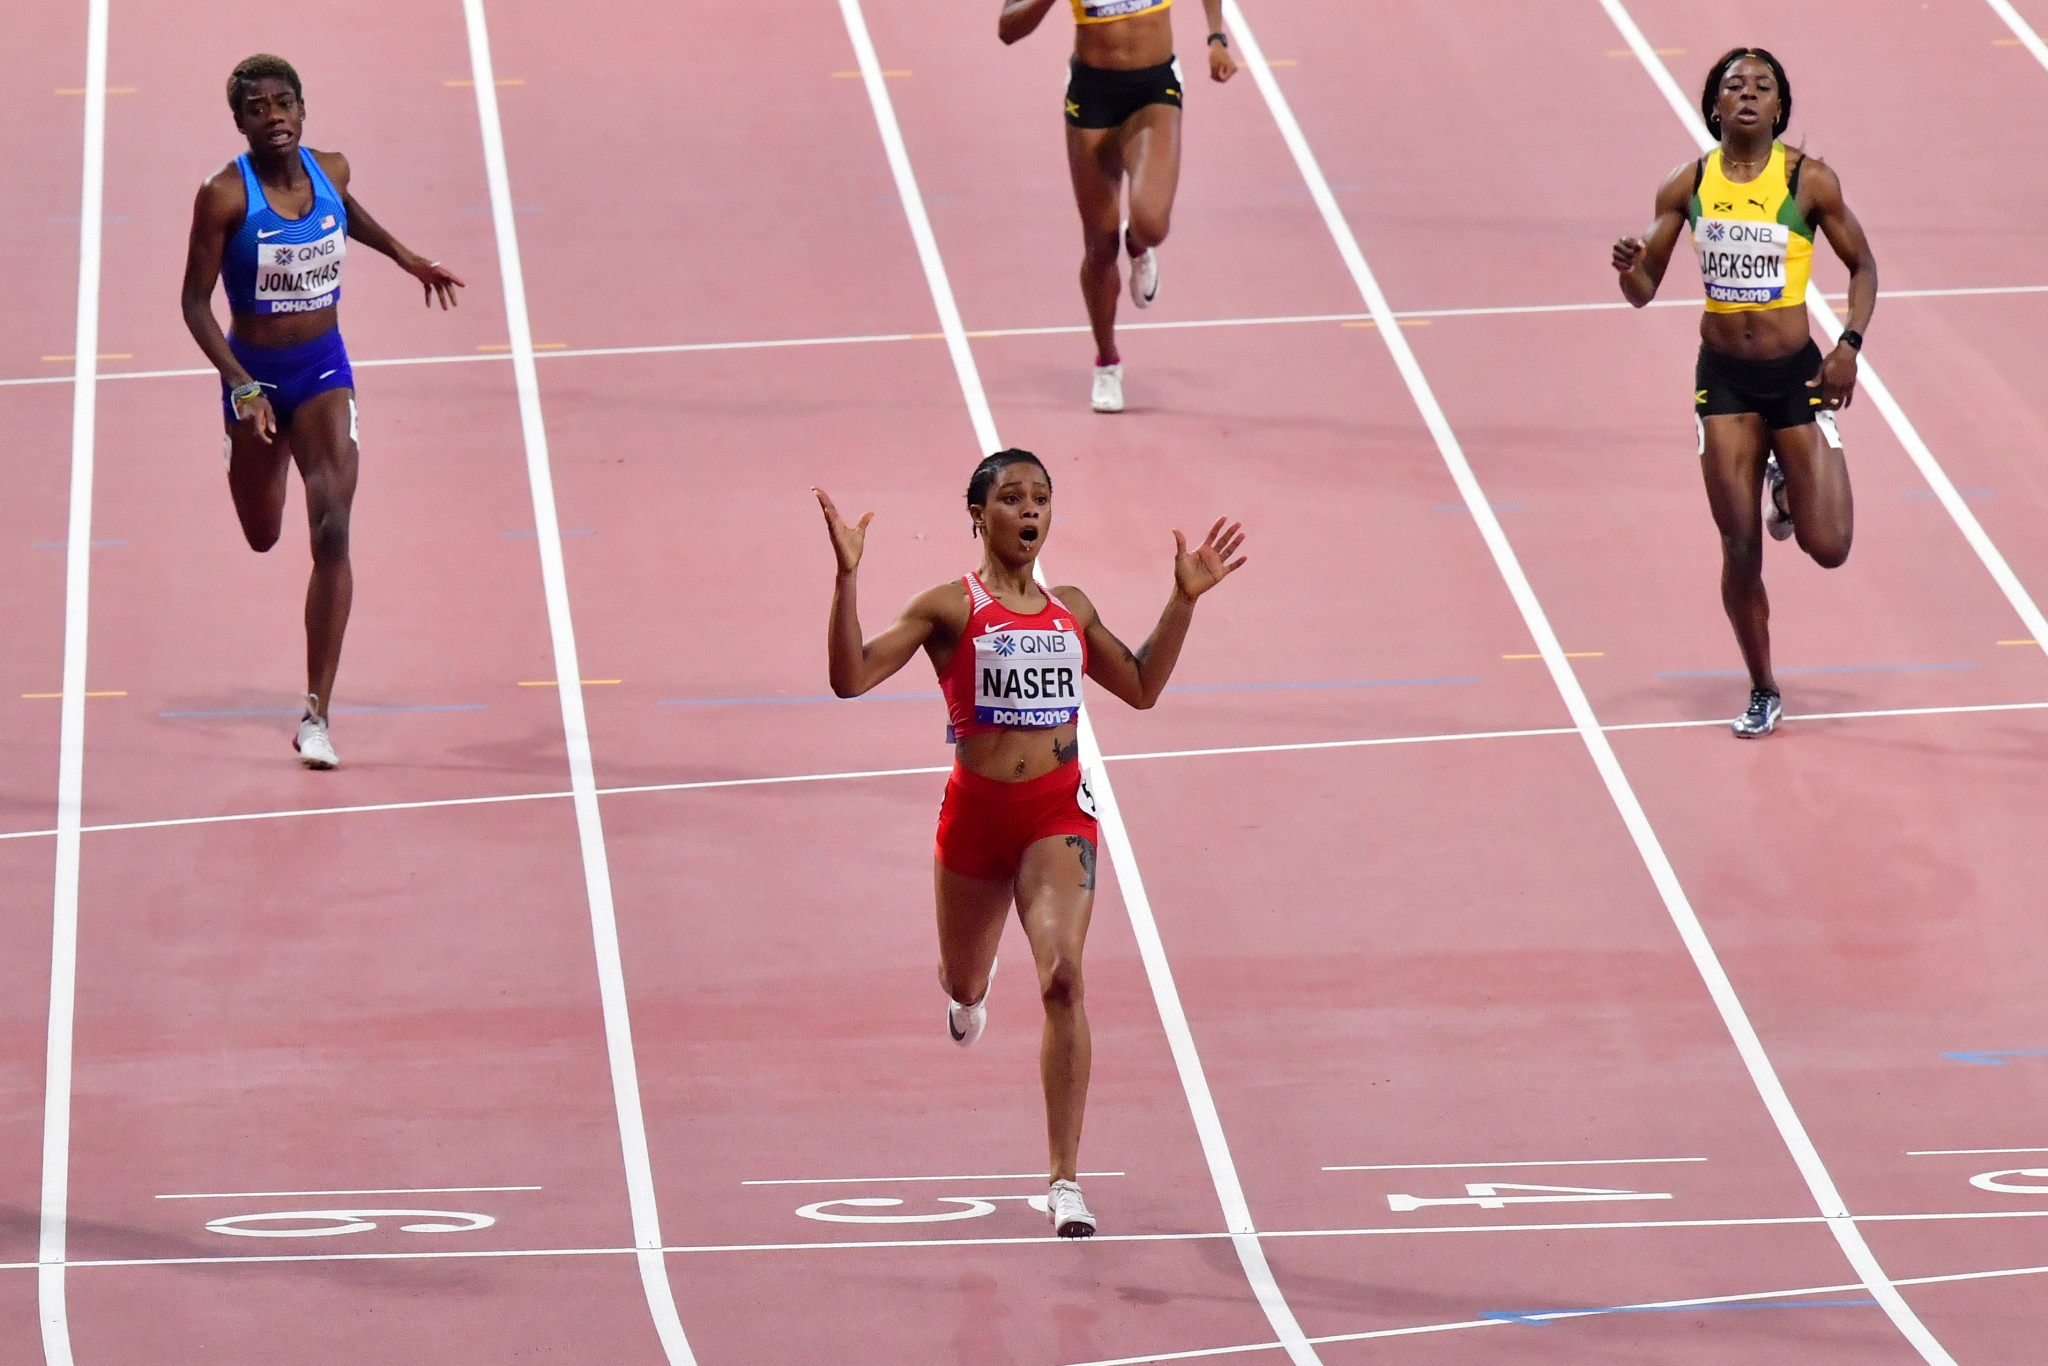 Salwa Eid Naser was charged with four alleged whereabouts failures by the Athletics Integrity Unit in June last year ©Getty Images